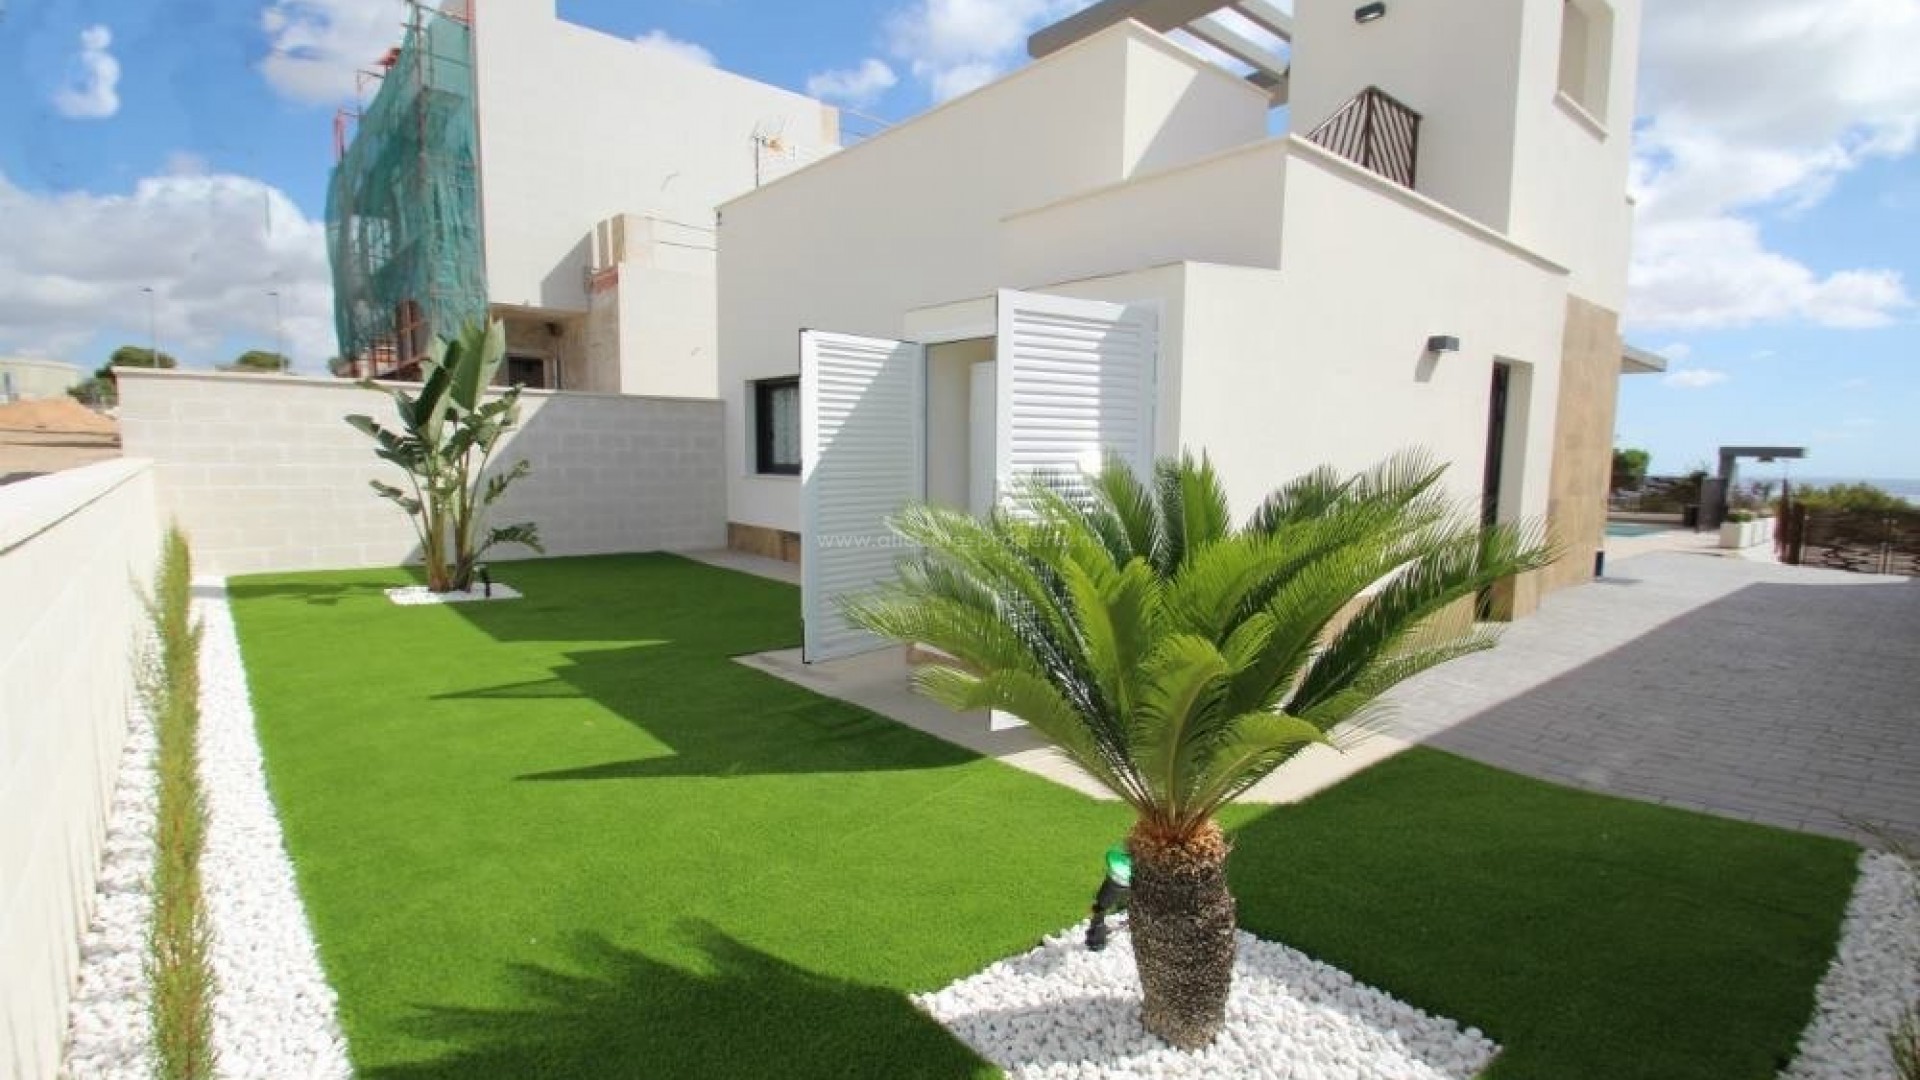 Exclusive villas/houses in San Miguel de Salinas, near Torrevieja, 3 bedrooms, 3 bathrooms, terrace and solarium, private garden with swimming pool and driveway